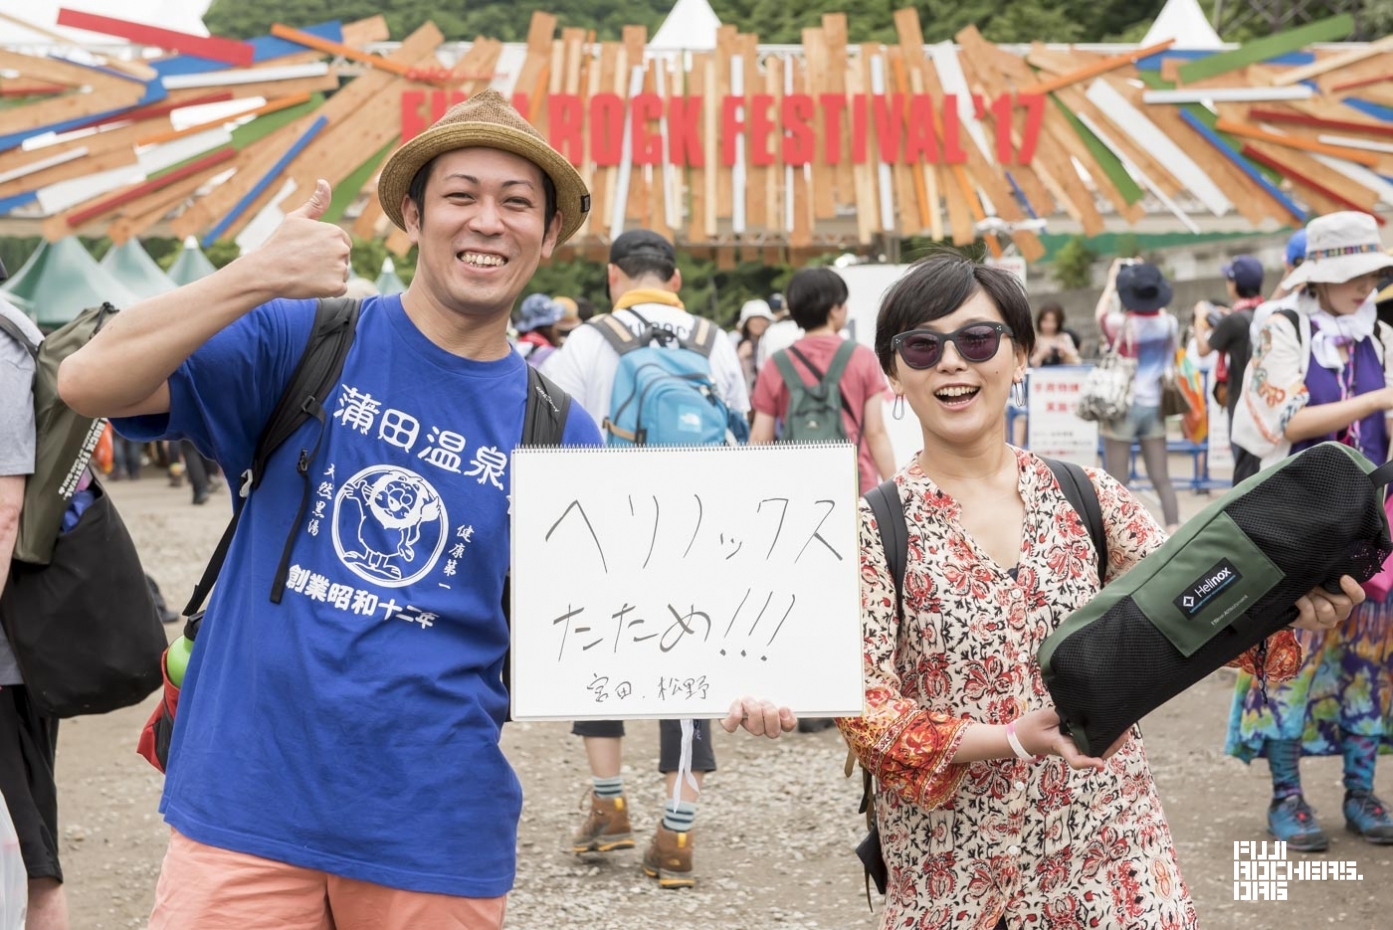 Message for Fujirock #52